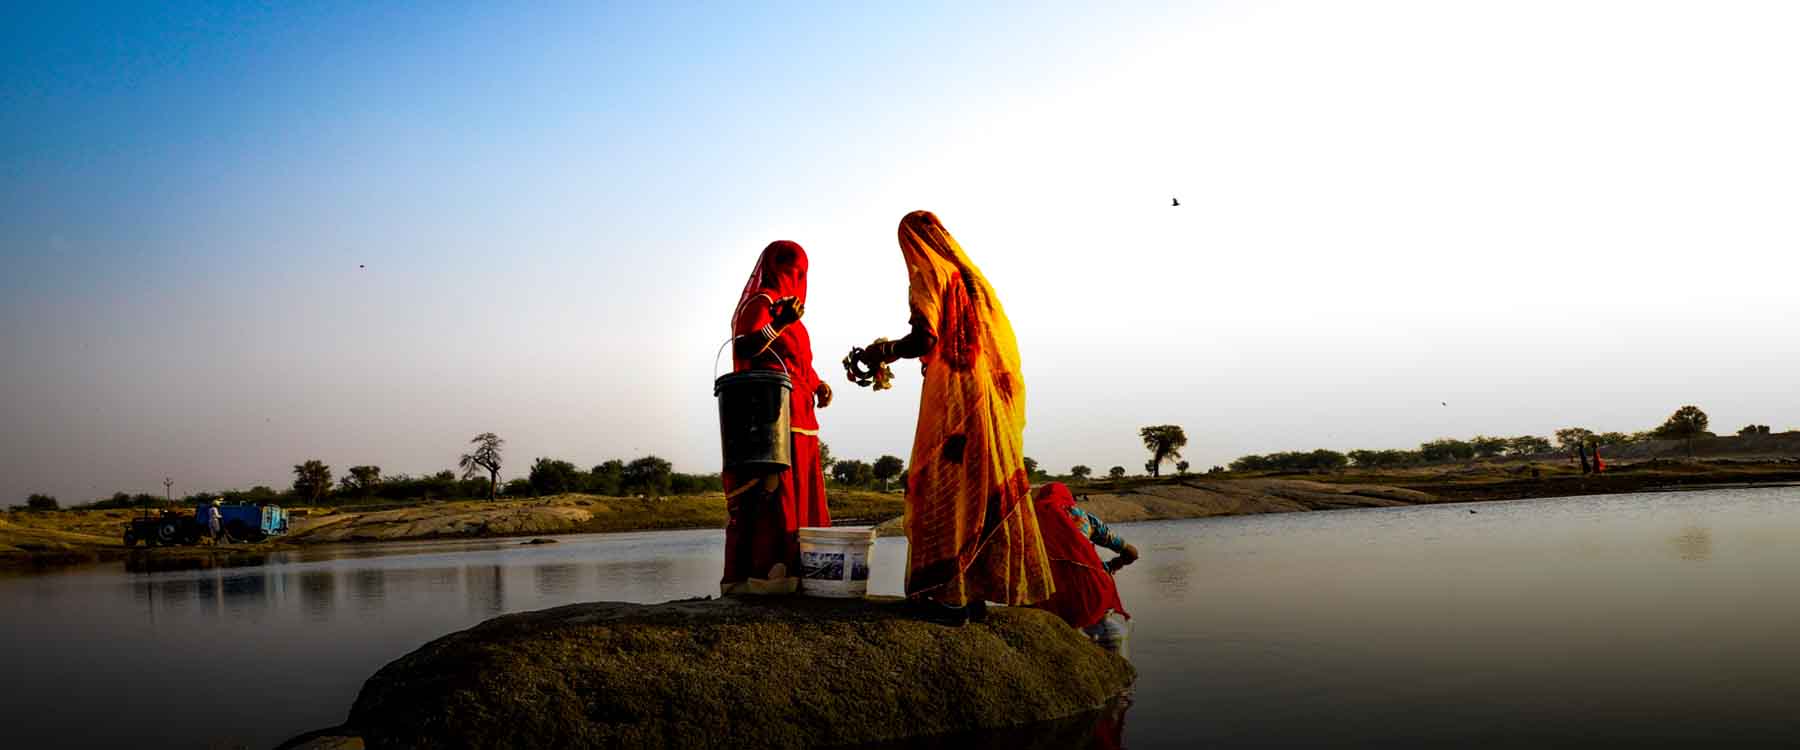 Rajasthani women in a village of Rajasthan fetching water from a natural lake I women of Rajasthan Dressed in bright clothes